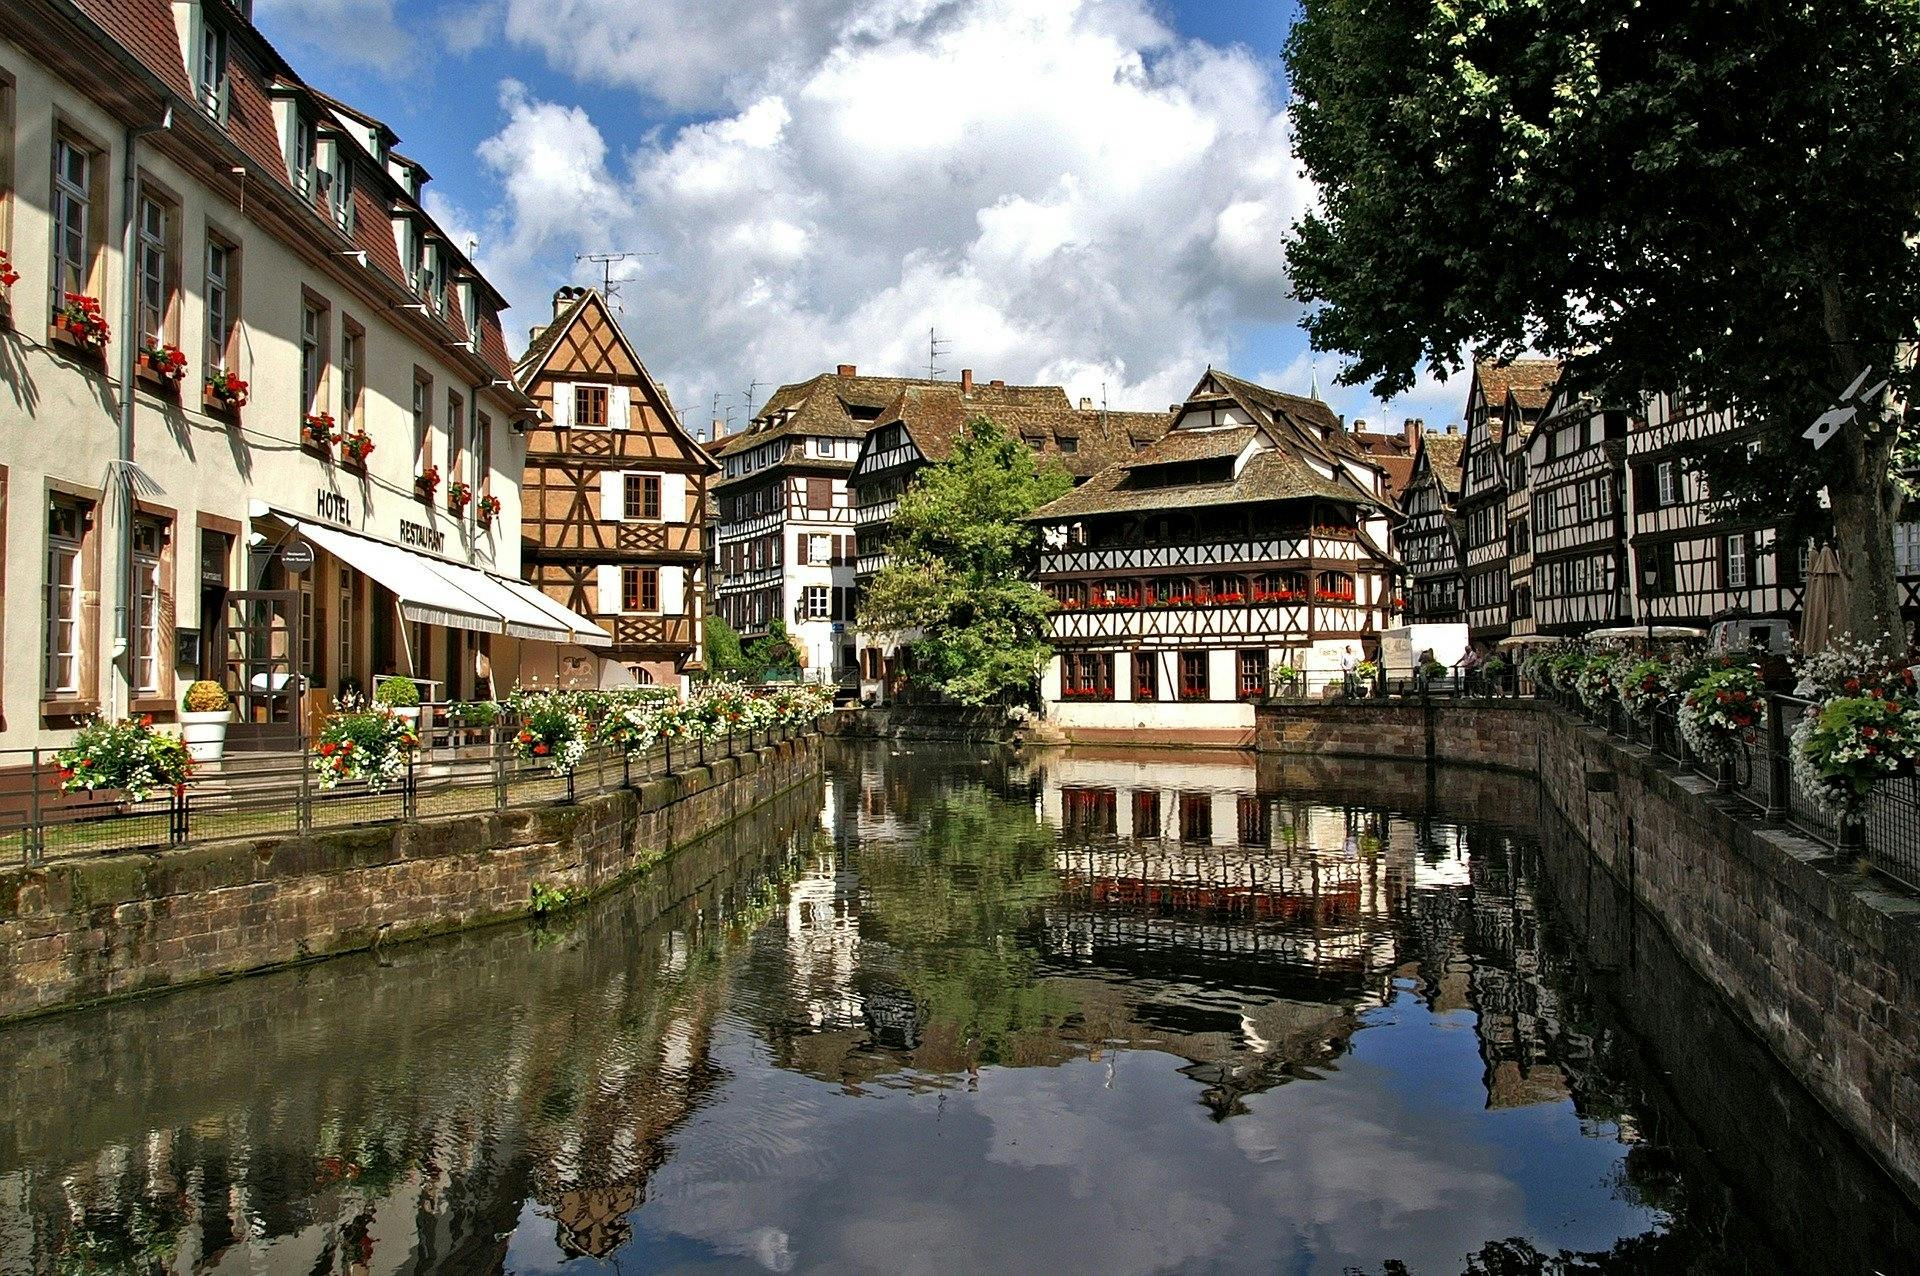 Photogenic Strasbourg walking tour with a Local Musement